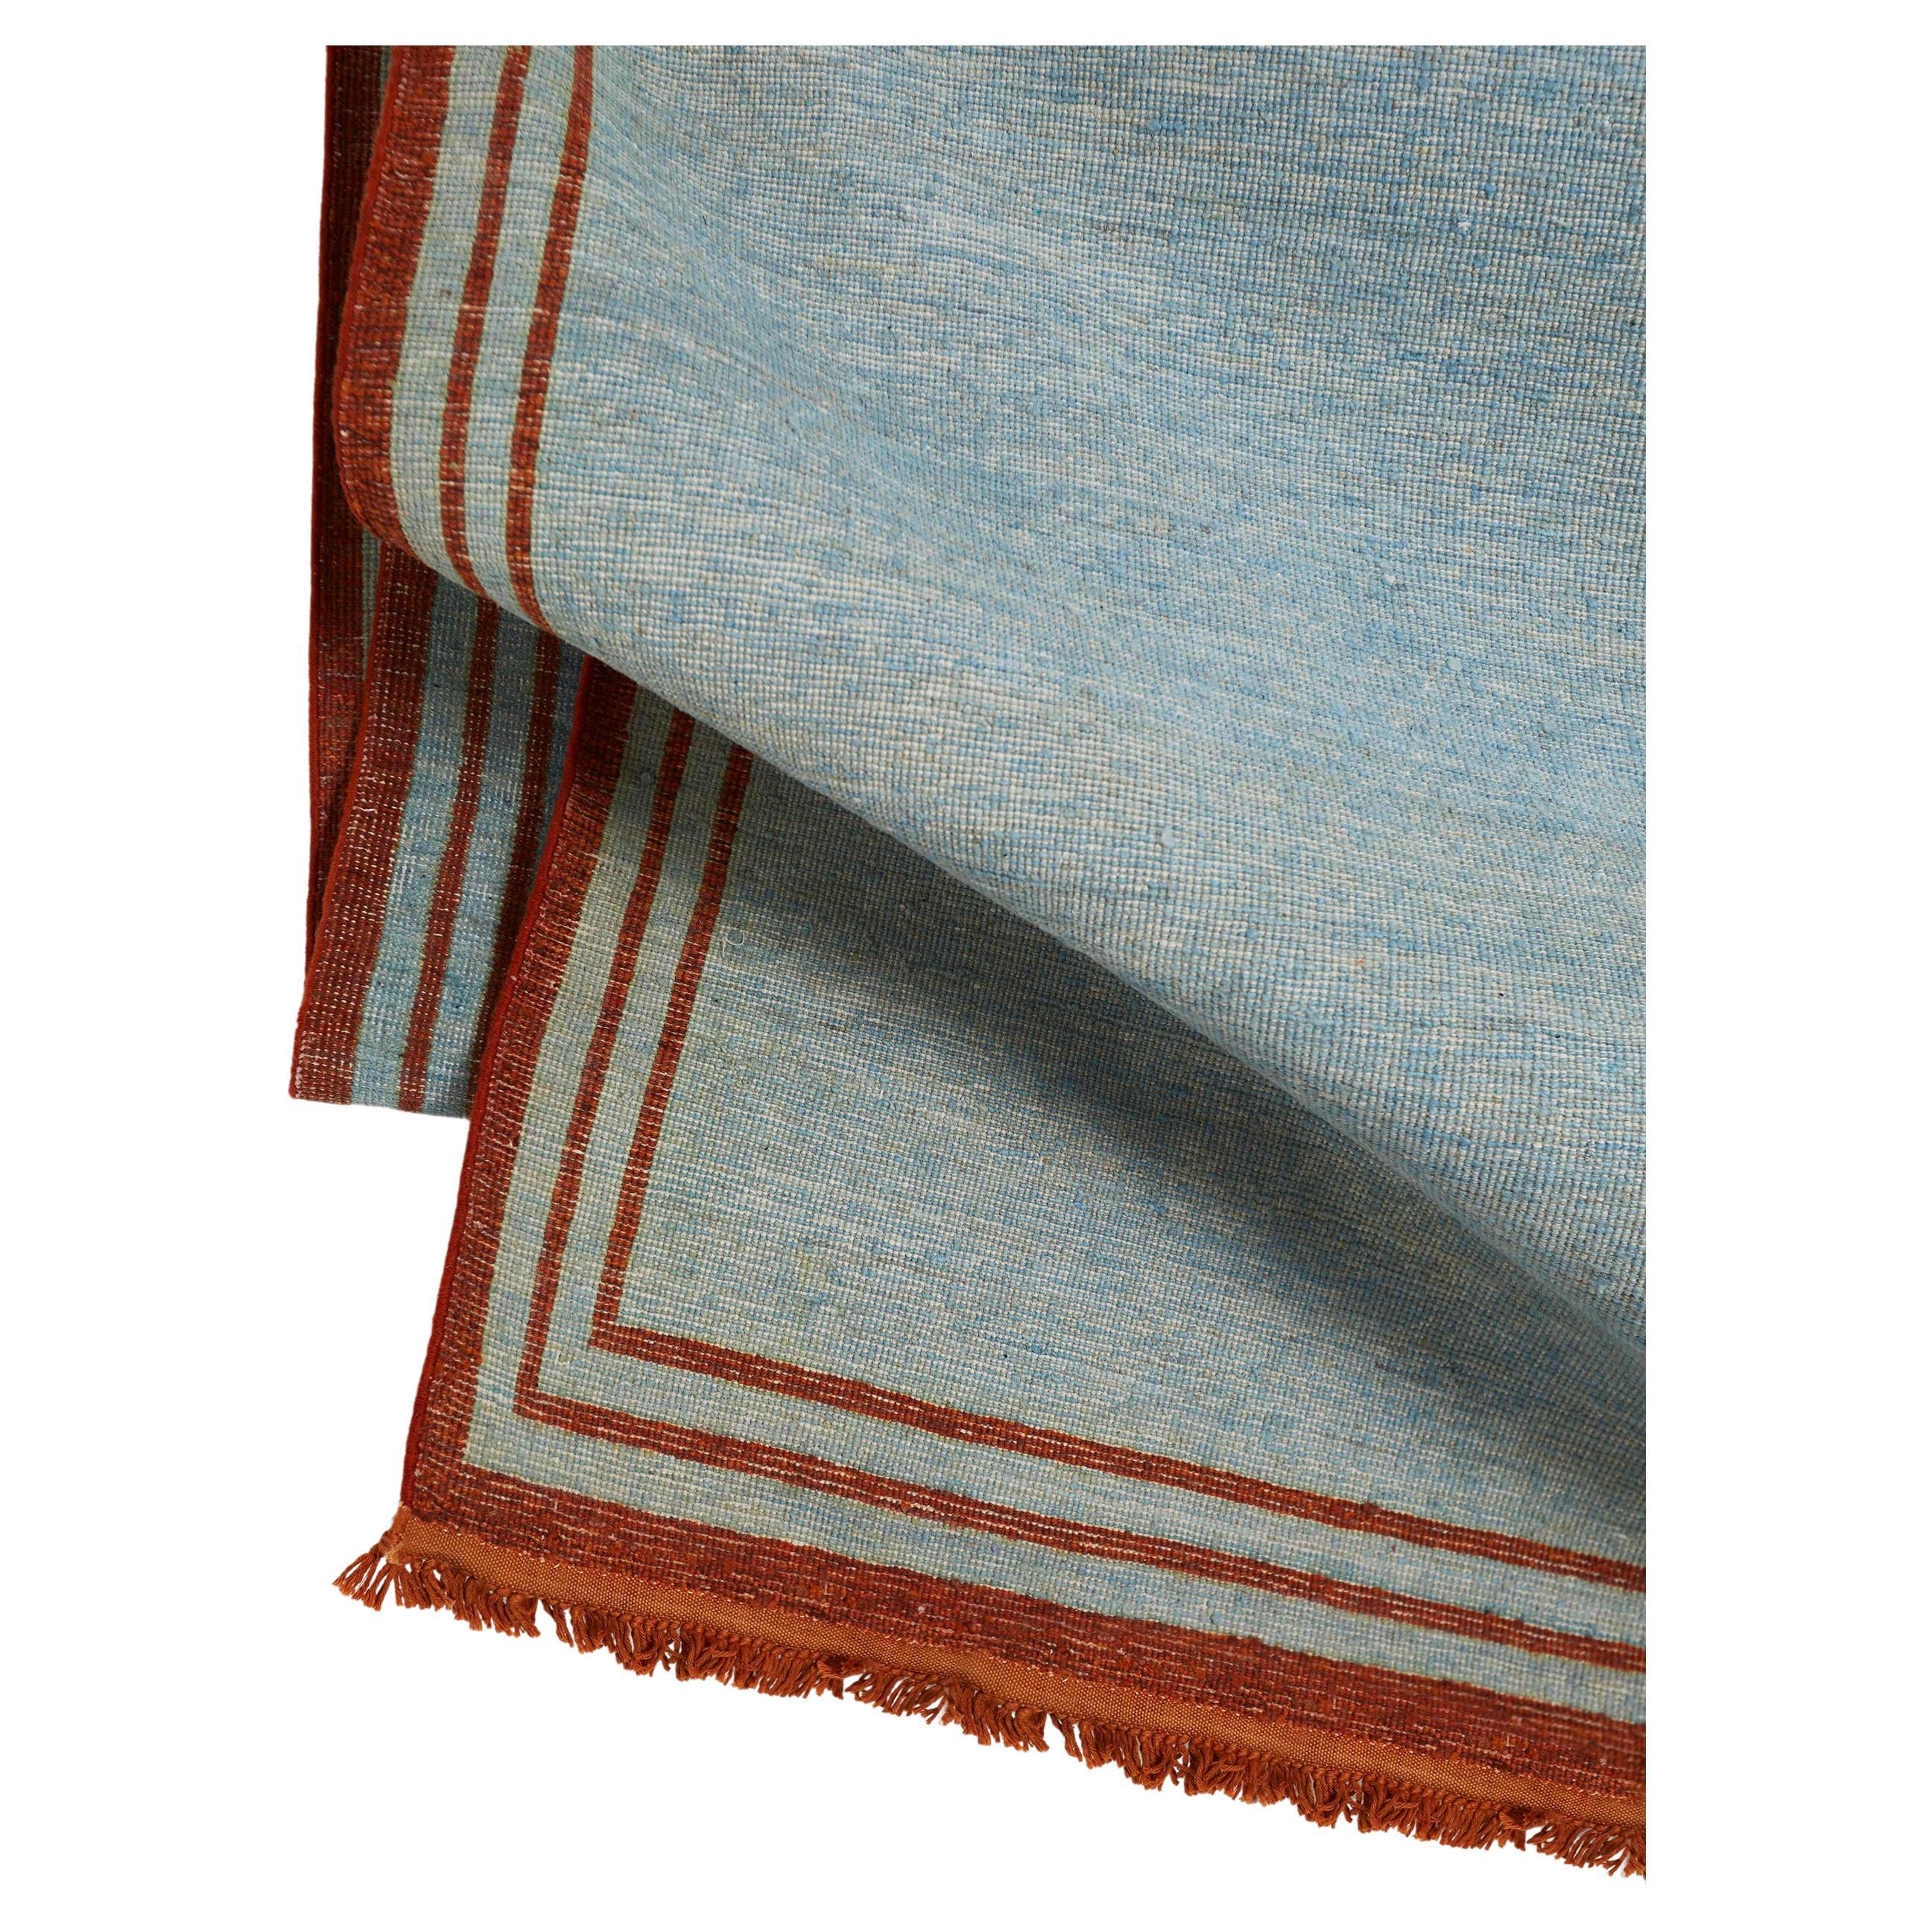 The Terracotta by the Sea Rug

A hand-knotted, 100% Ghazni Wool rug.

Made in Pakistan.

The terracotta tiles have warmed from the sun to create the perfect place to perch by the sea. We occasionally jump to and from the tiled ledge for a dip into